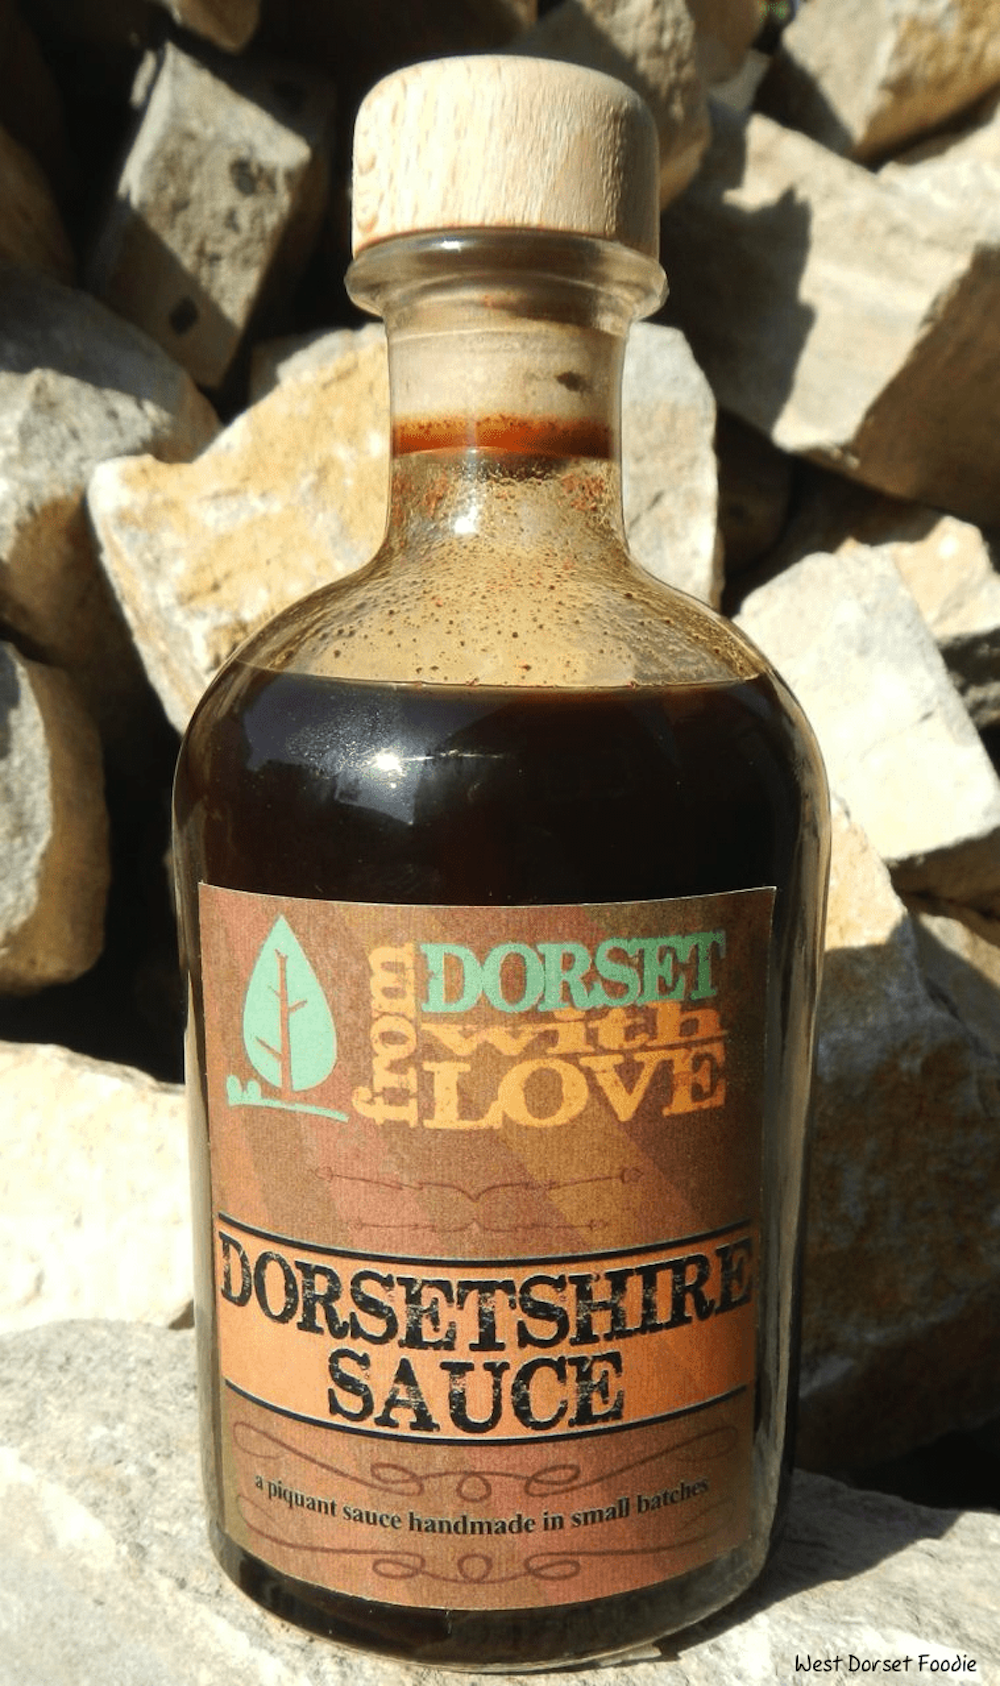 Review of Dorsetshire Sauce